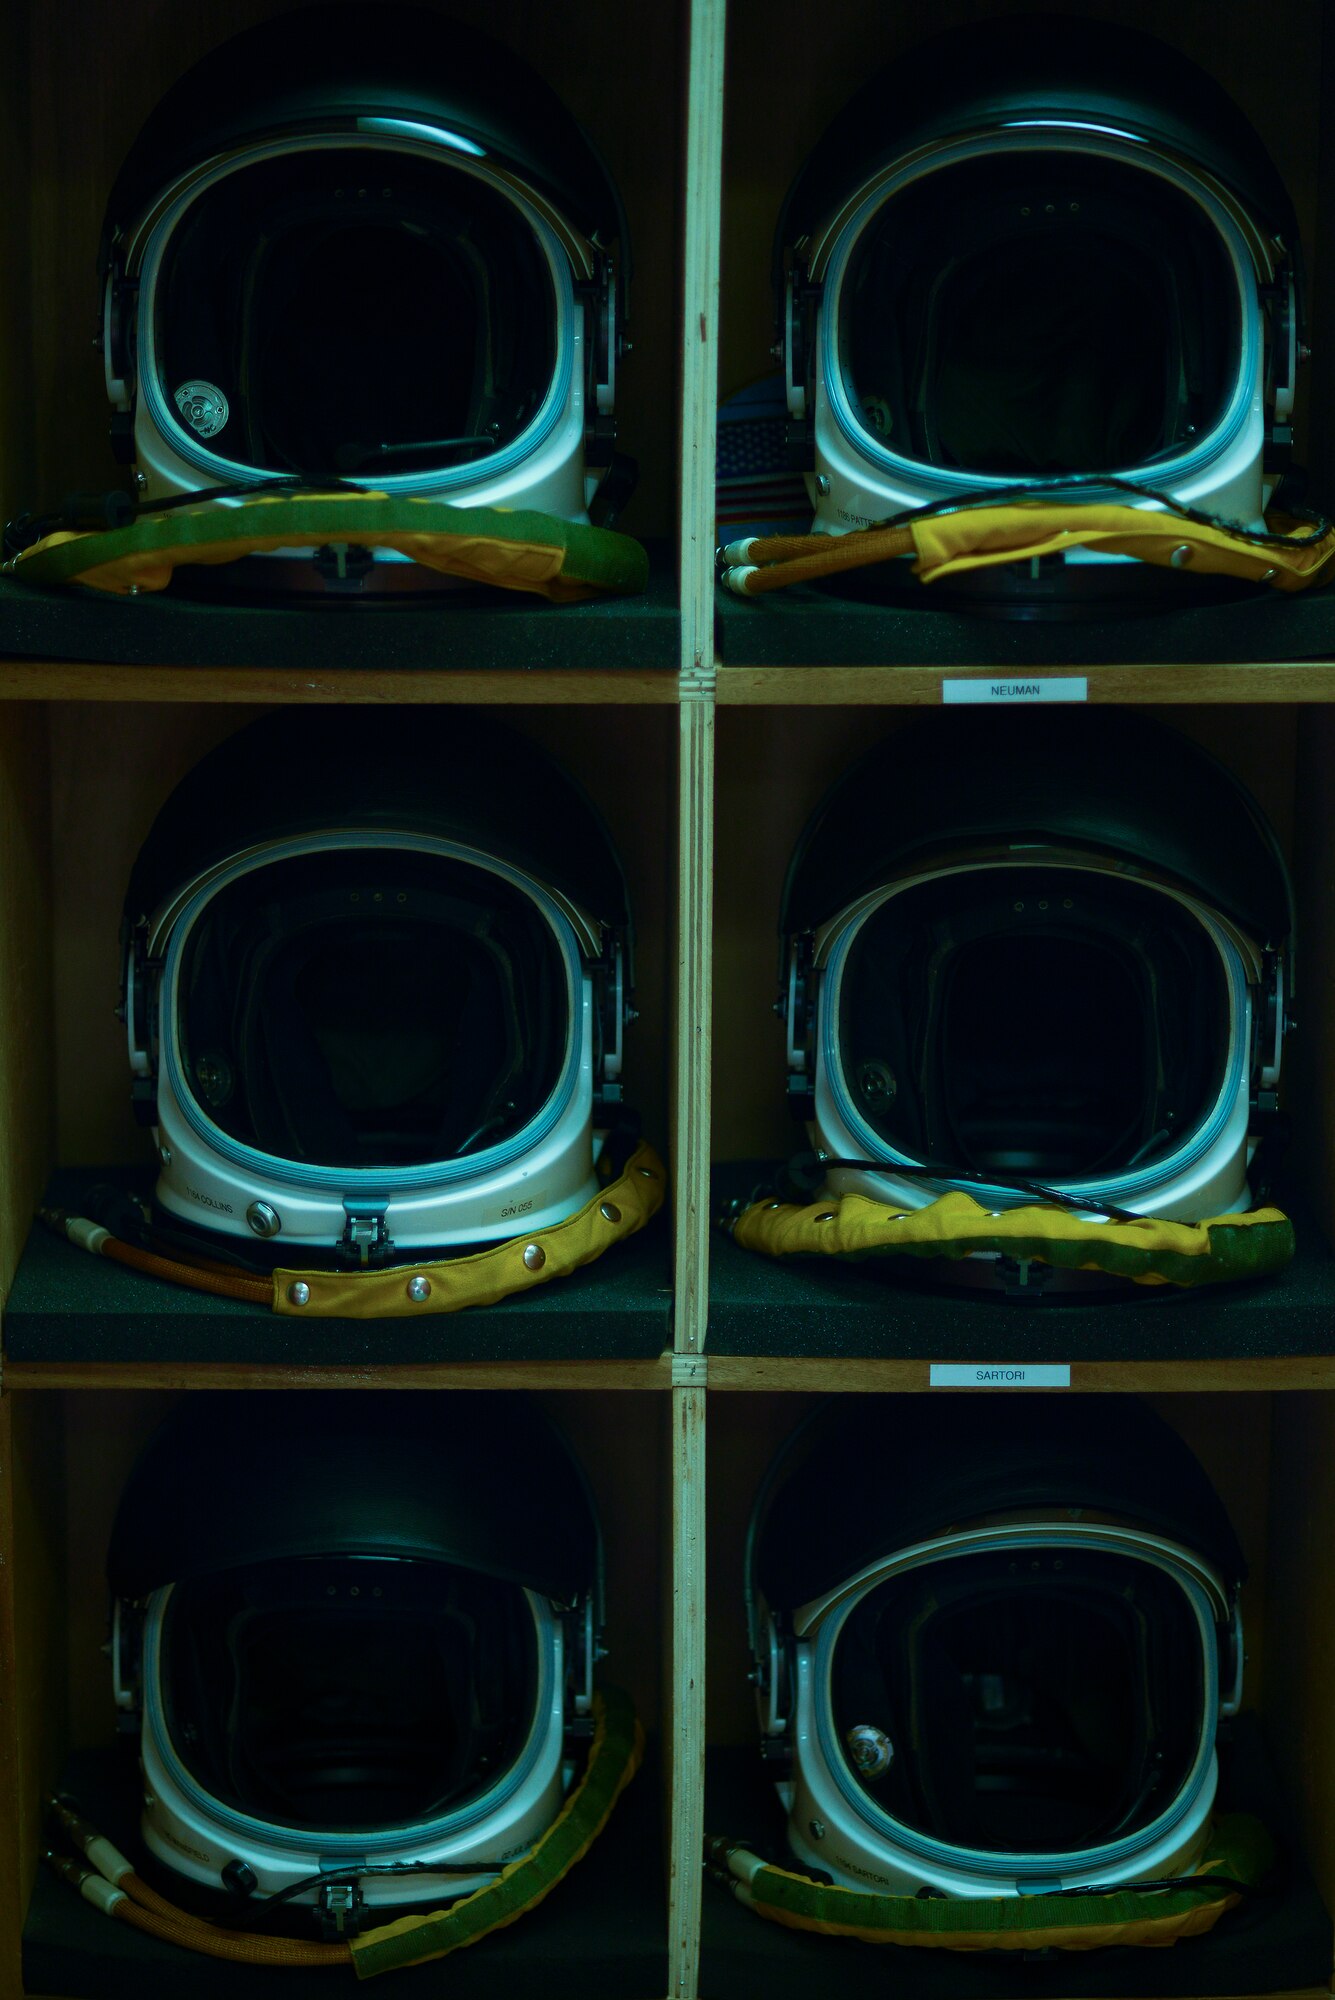 Full pressure suit helmets sit in the aircrew locker room at the 99th Expeditionary Reconnaissance Squadron April 20, 2014, at a flightline in Southwest Asia. The helmets, unique to the U-2 Dragon Lady, are the only ones in the Air Force capable of sustaining pilots during high altitude flight. (U.S. Air Force photo/Tech. Sgt. Russ Scalf)